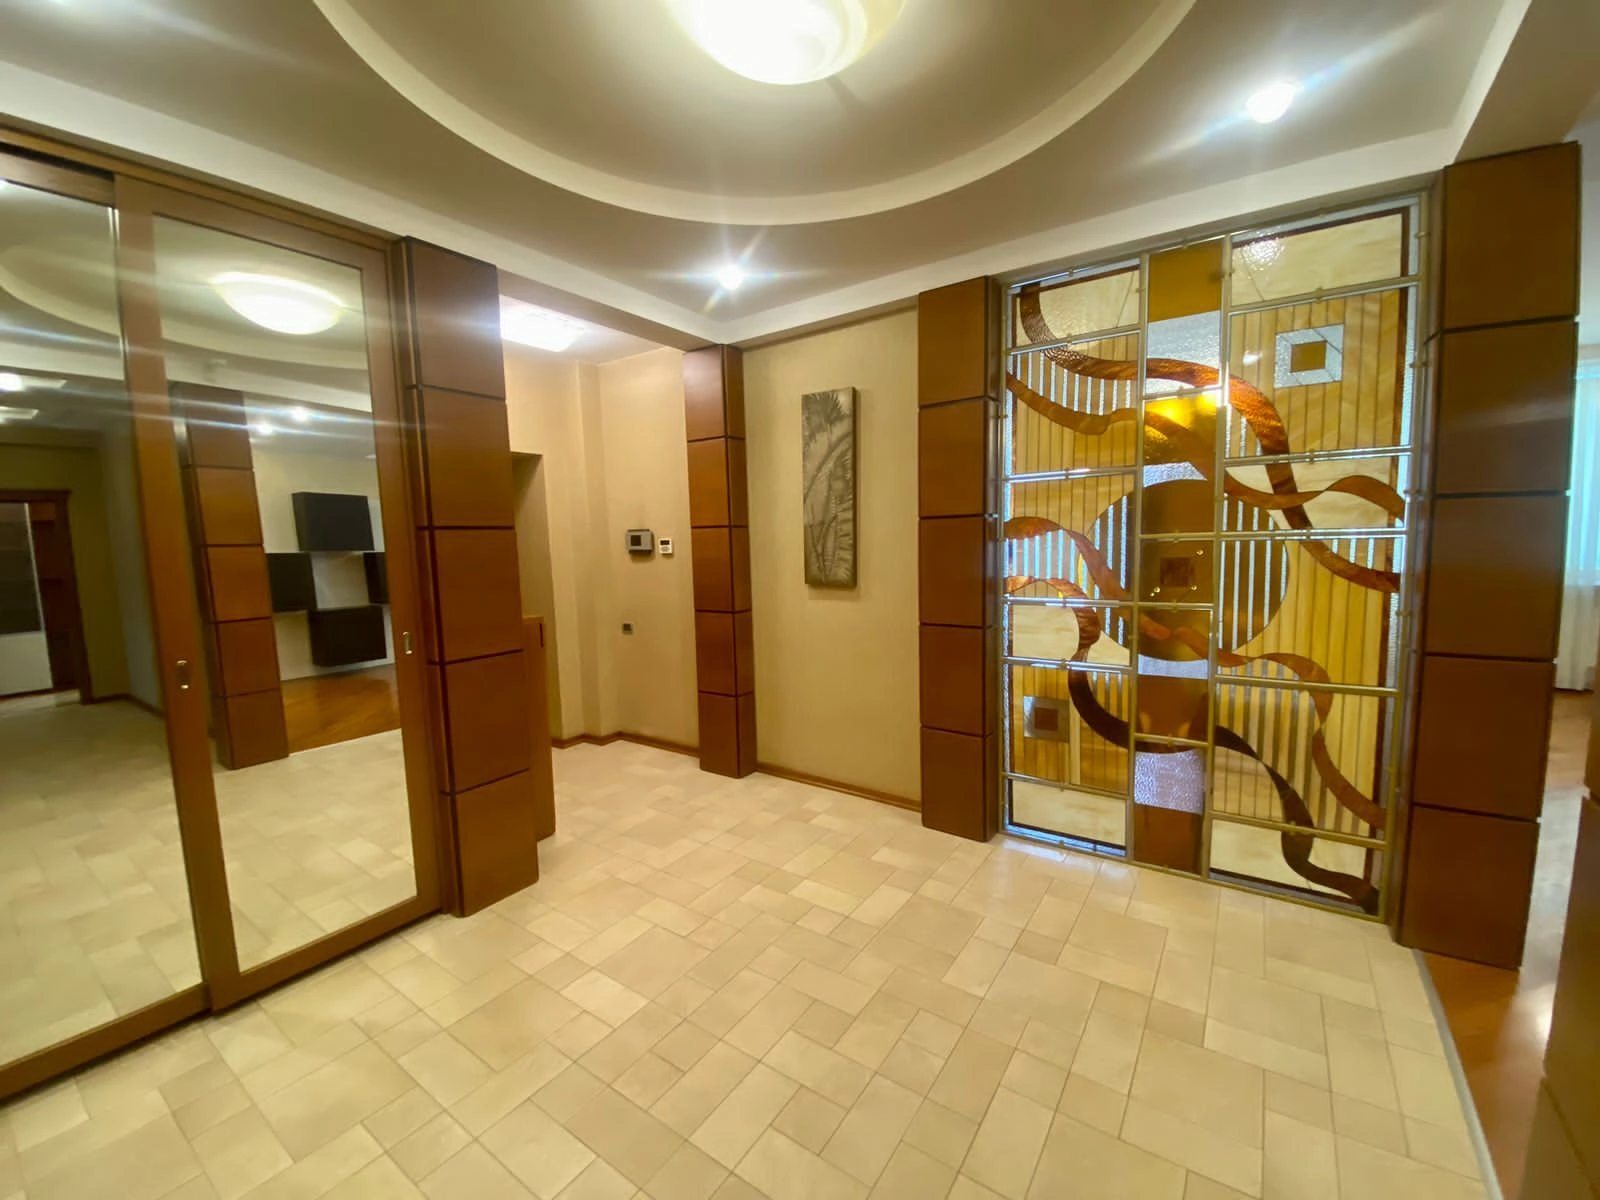 Apartments for sale. 2 rooms, 138 m², 2nd floor/5 floors. 3, Pedahohycheskyy per., Odesa. 